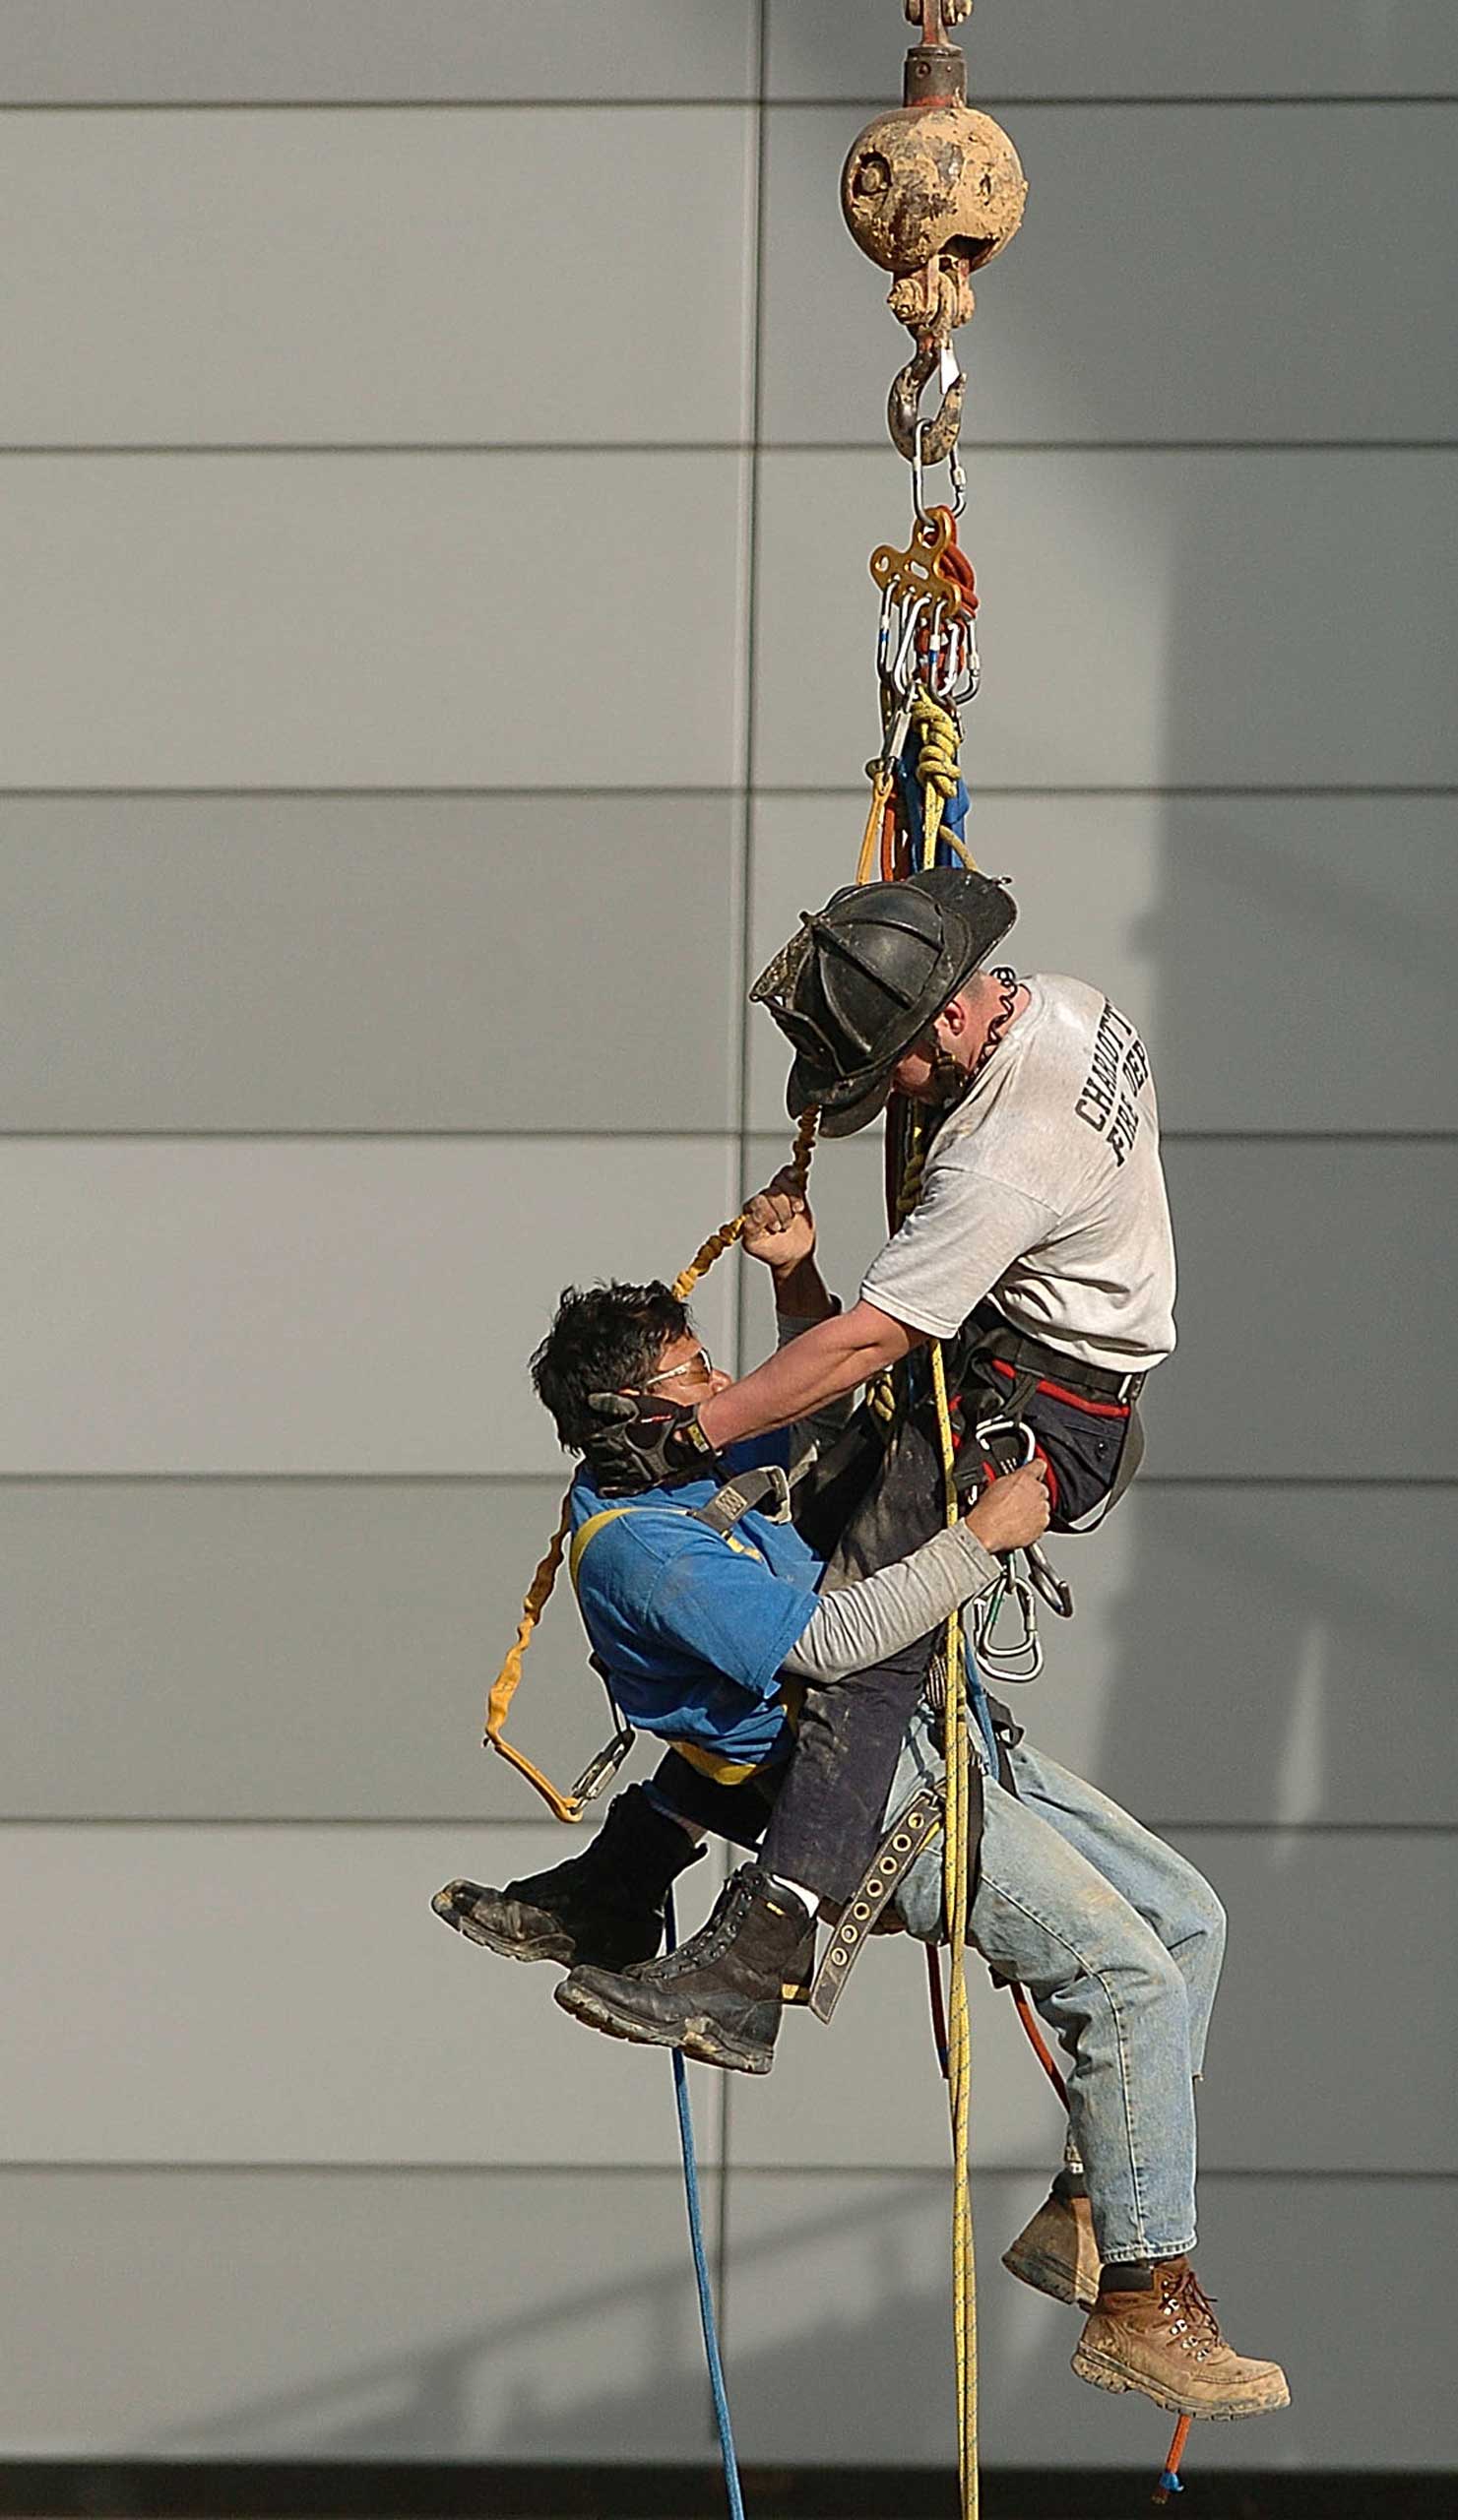 Firefighter Billy Mitchell rescues an injured construction worker in Uptown Charlotte on Feb. 23, 2005.